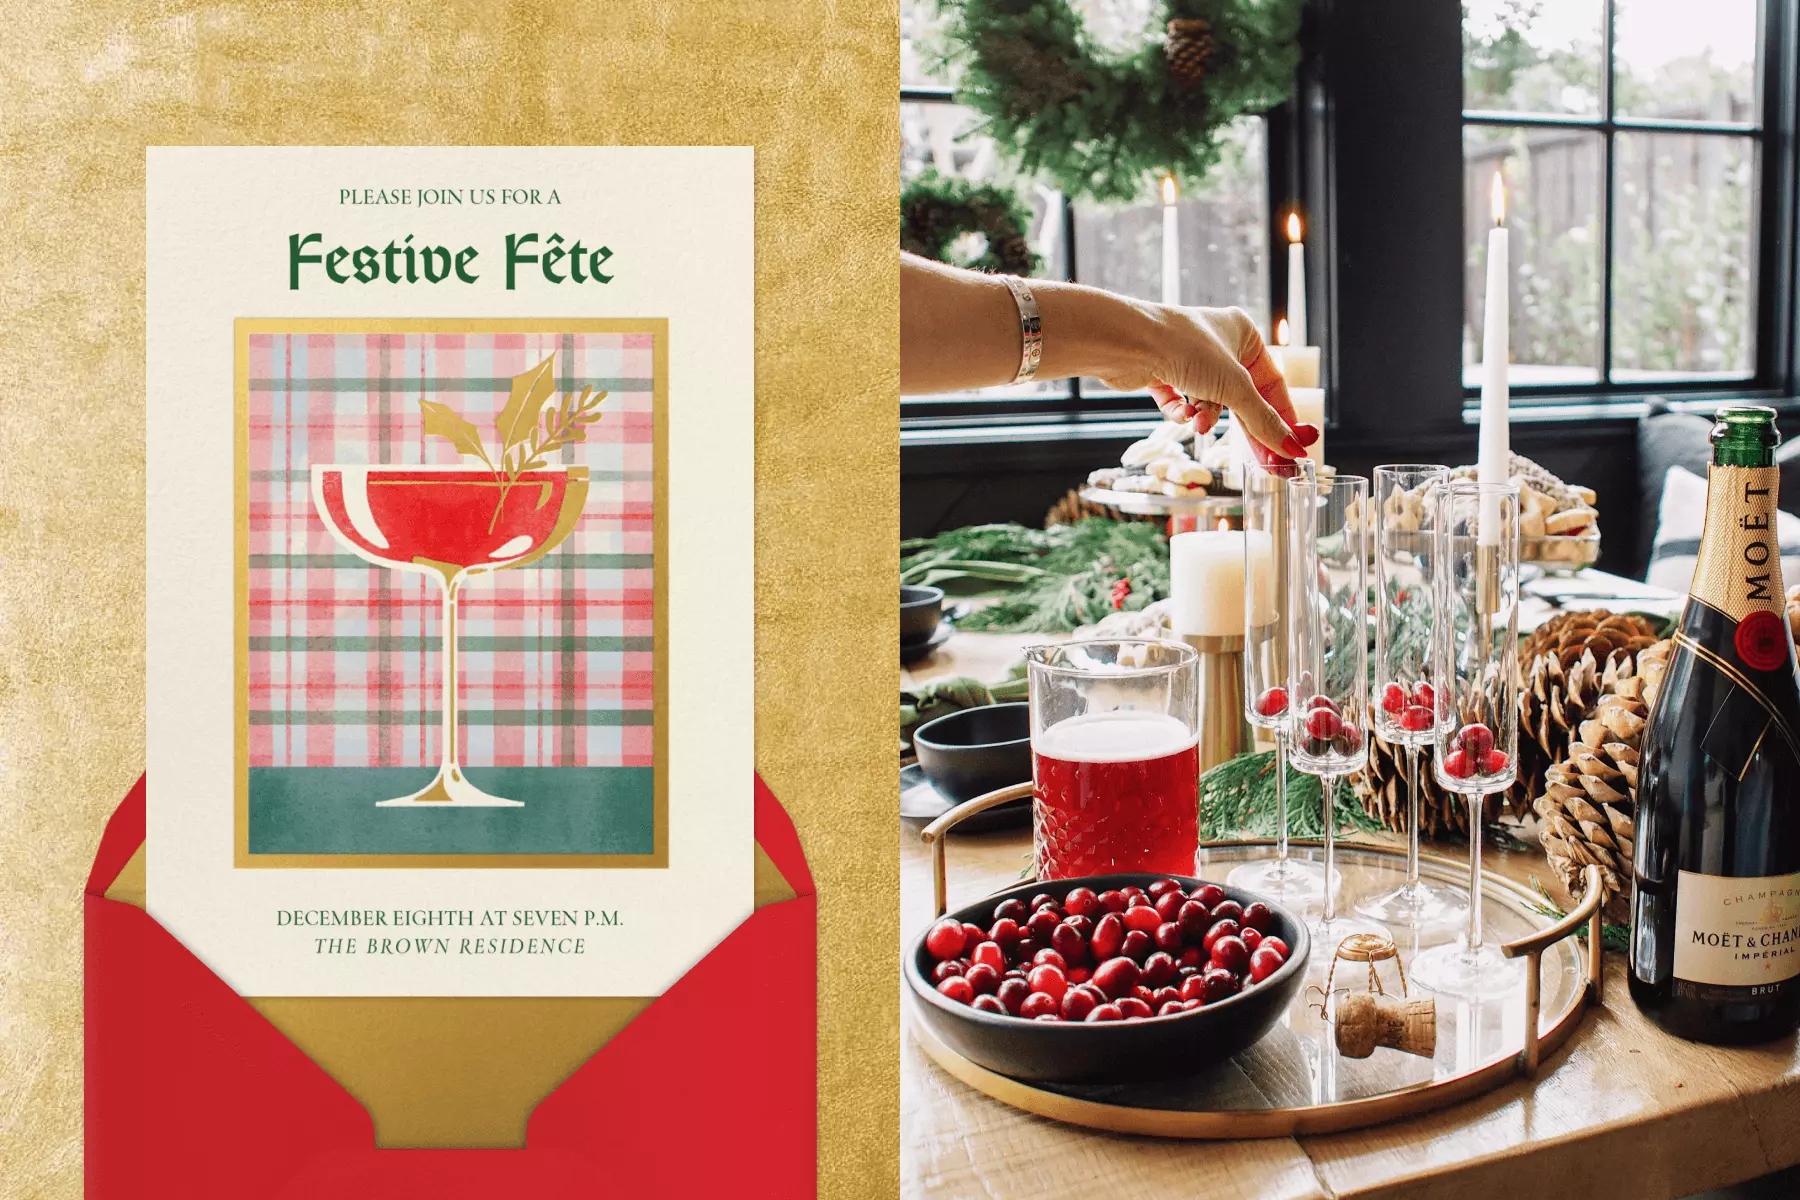 A holiday invitation with a red drink in a coupe glass with holly garnish in front of a plaid backdrop; someone puts cranberries into Champagne flutes in preparation of them being filled.